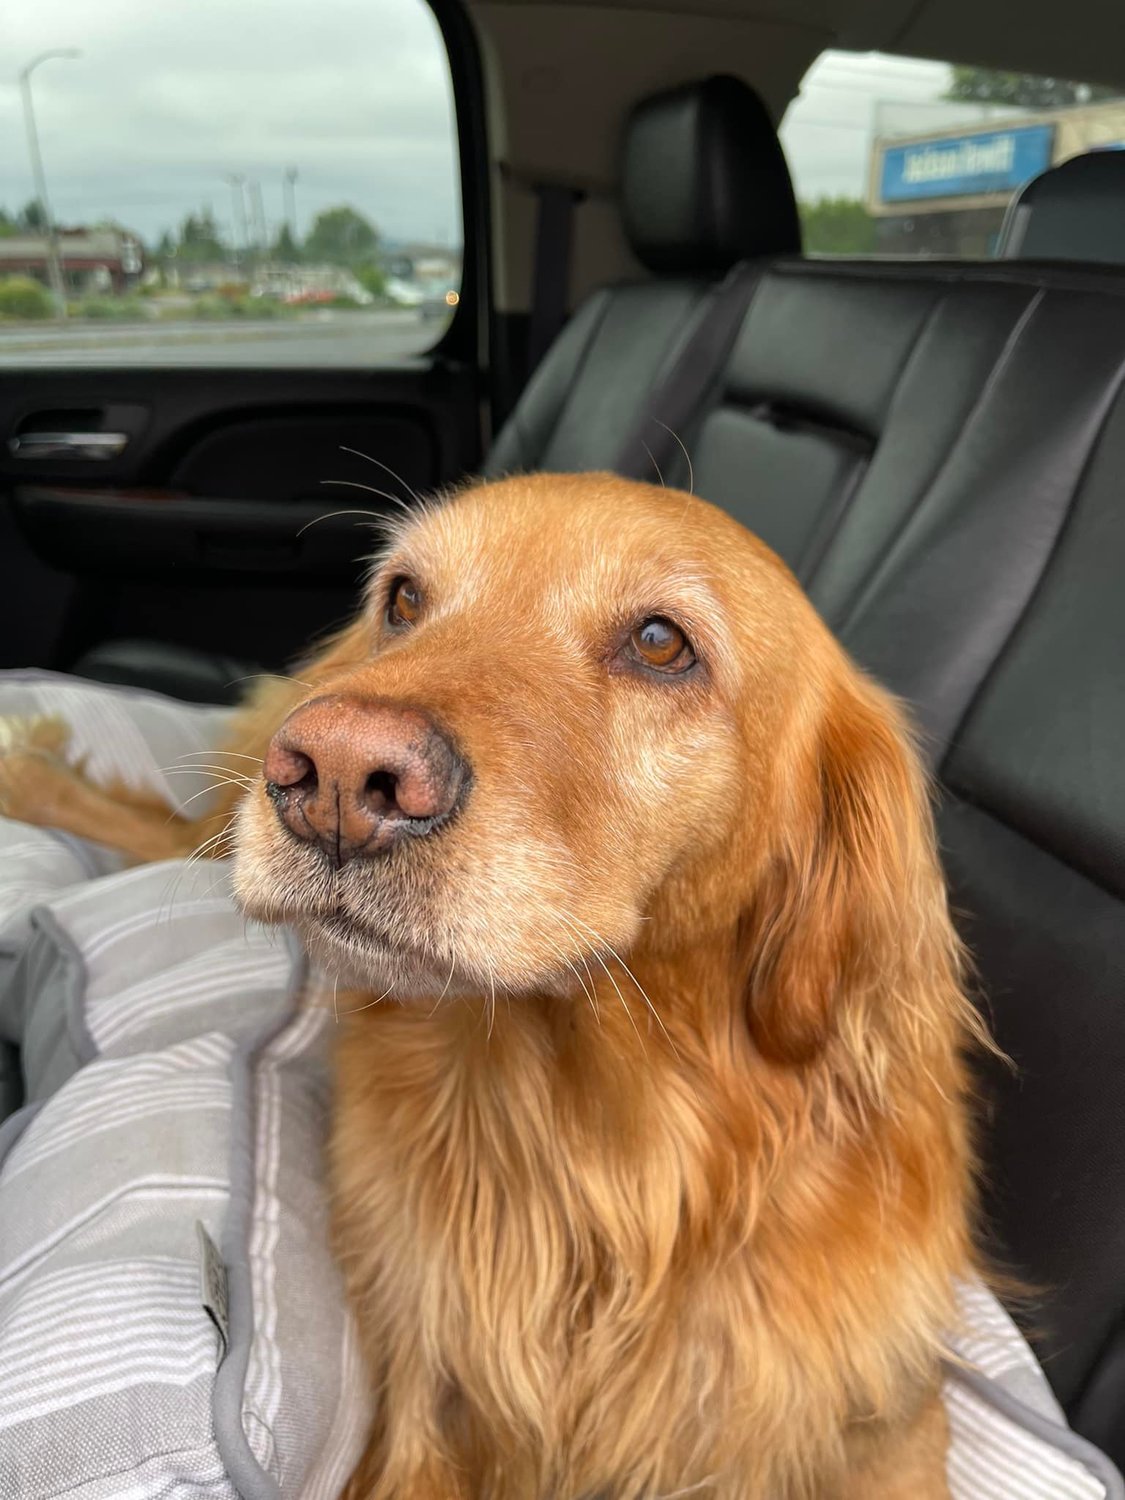 A dog sits in the car before going on a ride.